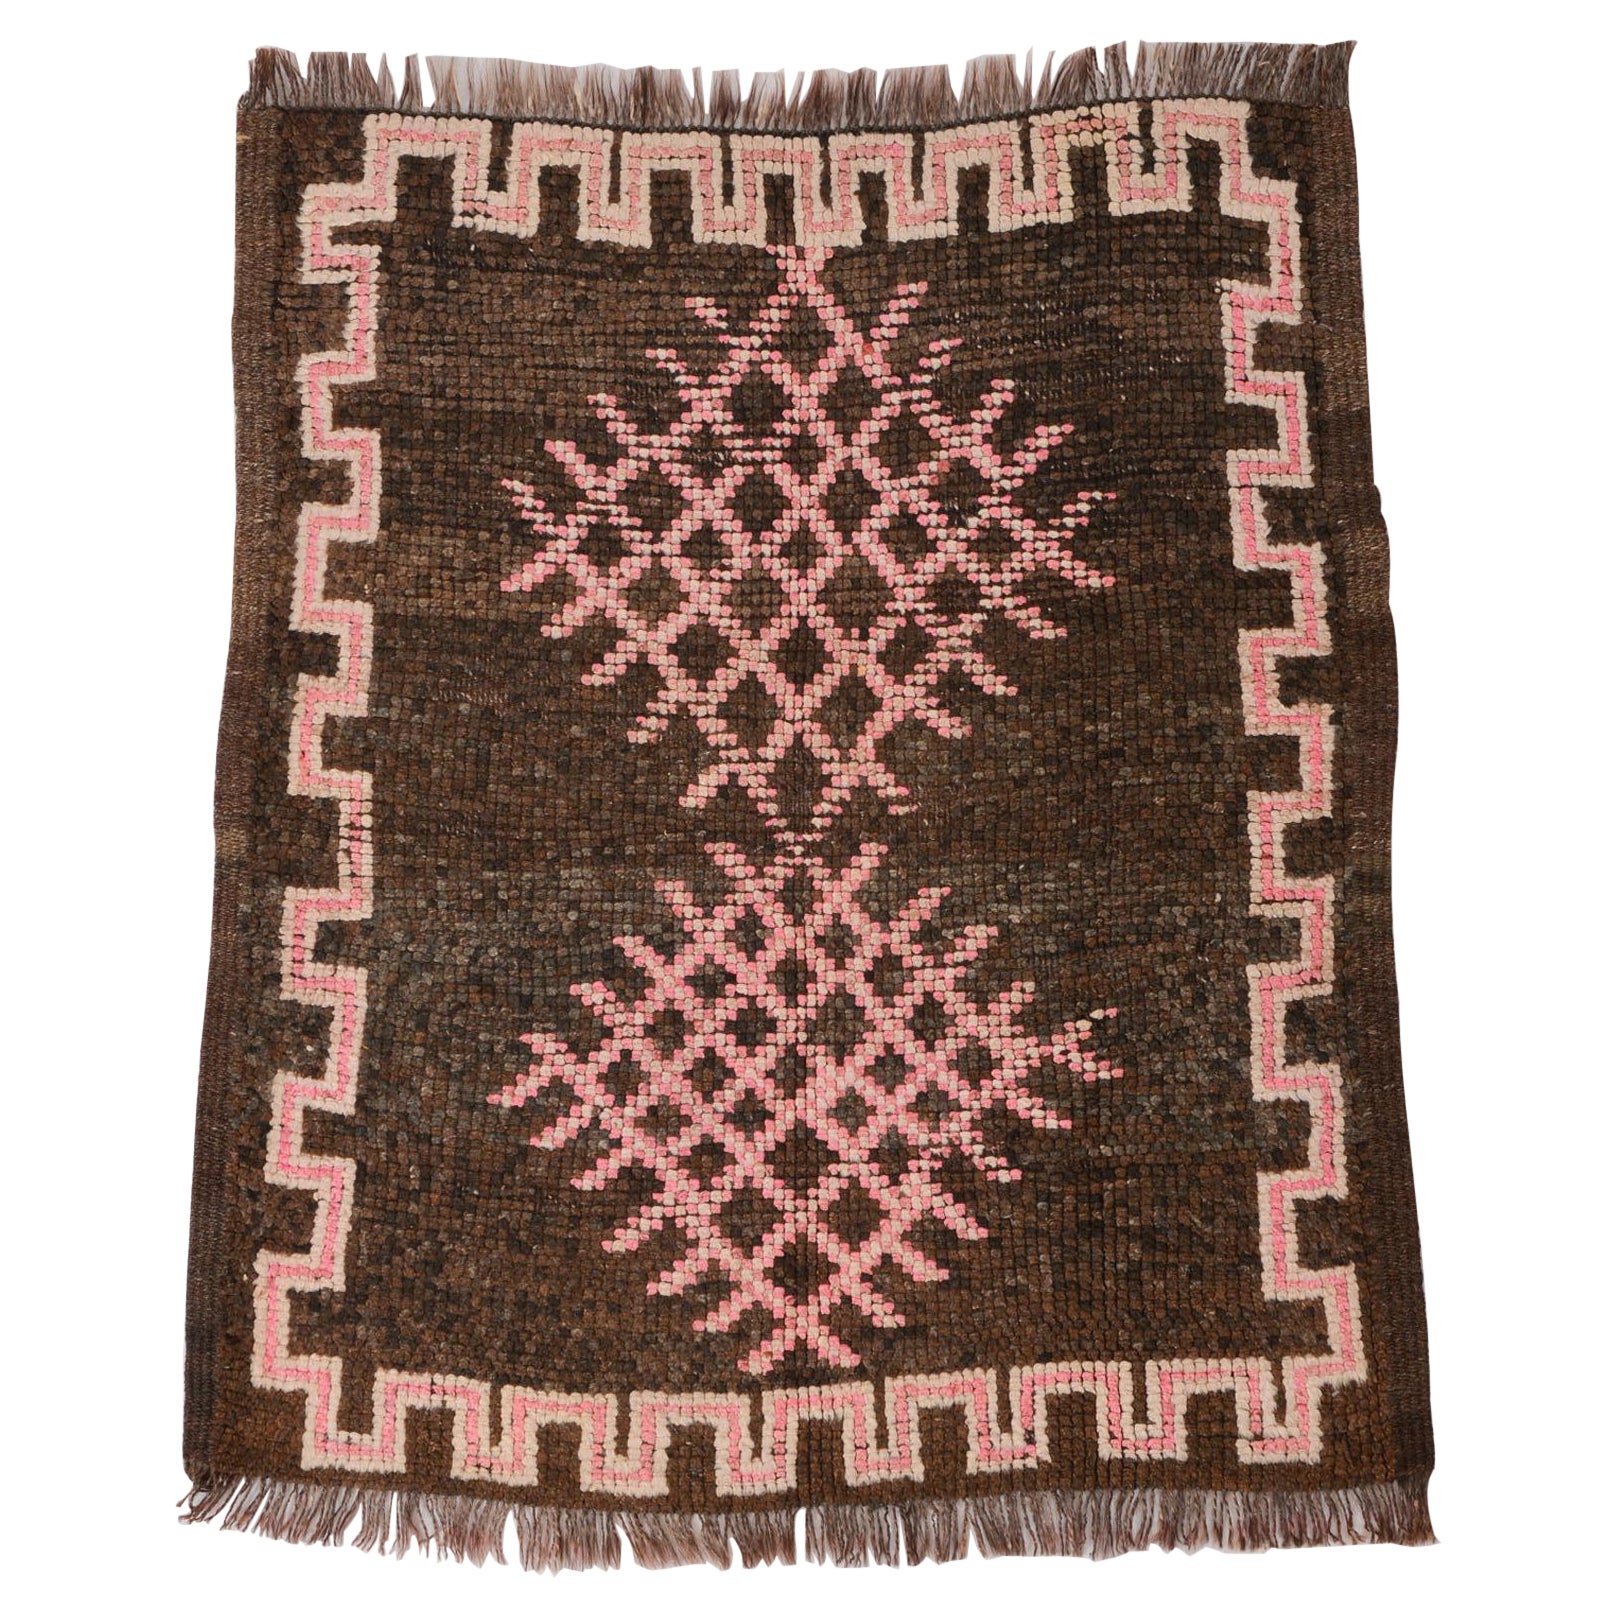 Old Moroccan Simple Naif Little Carpet For Sale